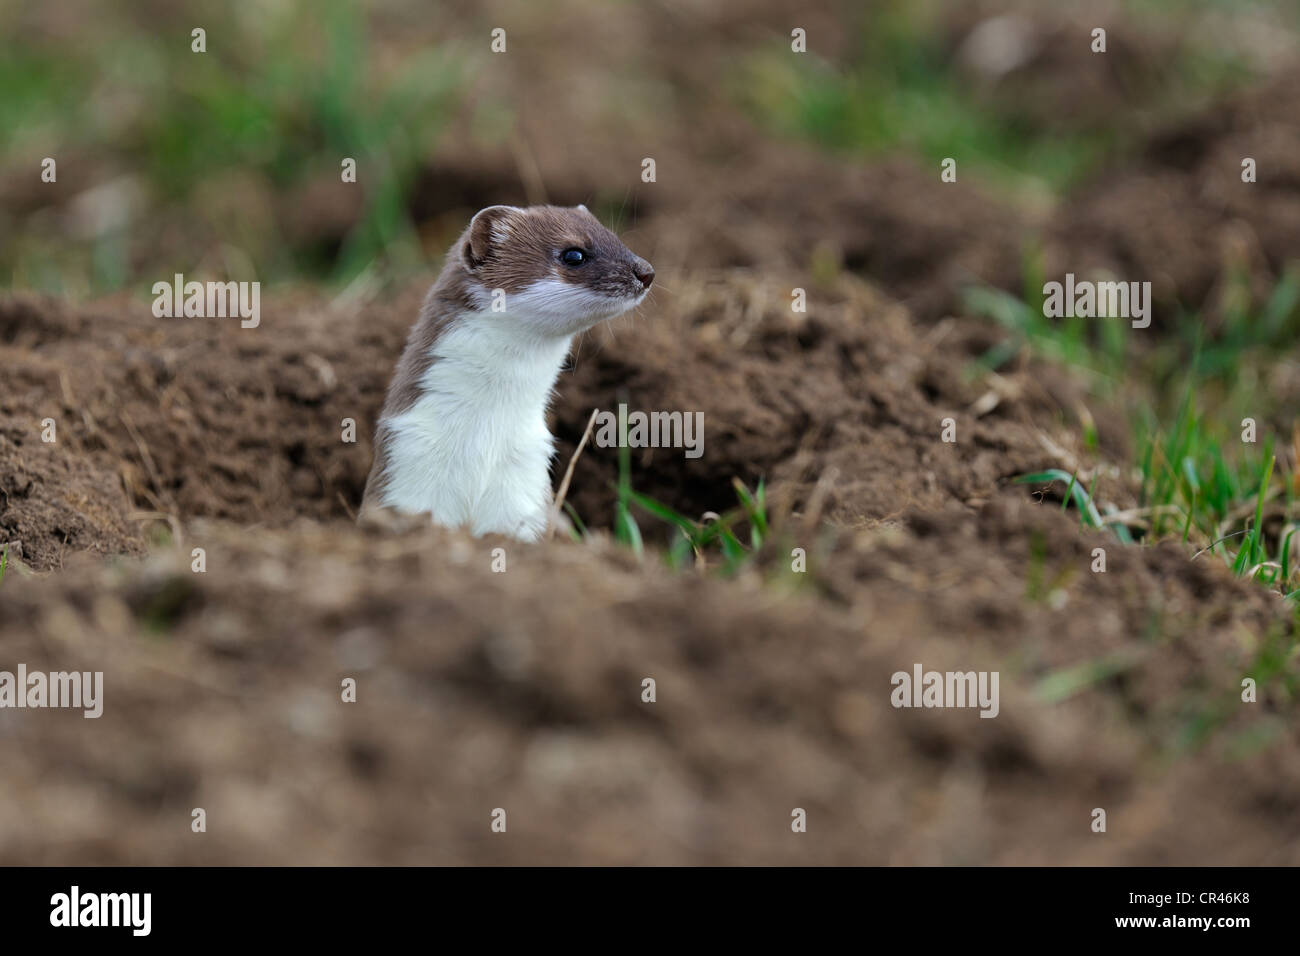 Stoat, ermine or short-tailed weasel (Mustela erminea), in summer coat, guardingly looking out of its burrow, Stock Photo